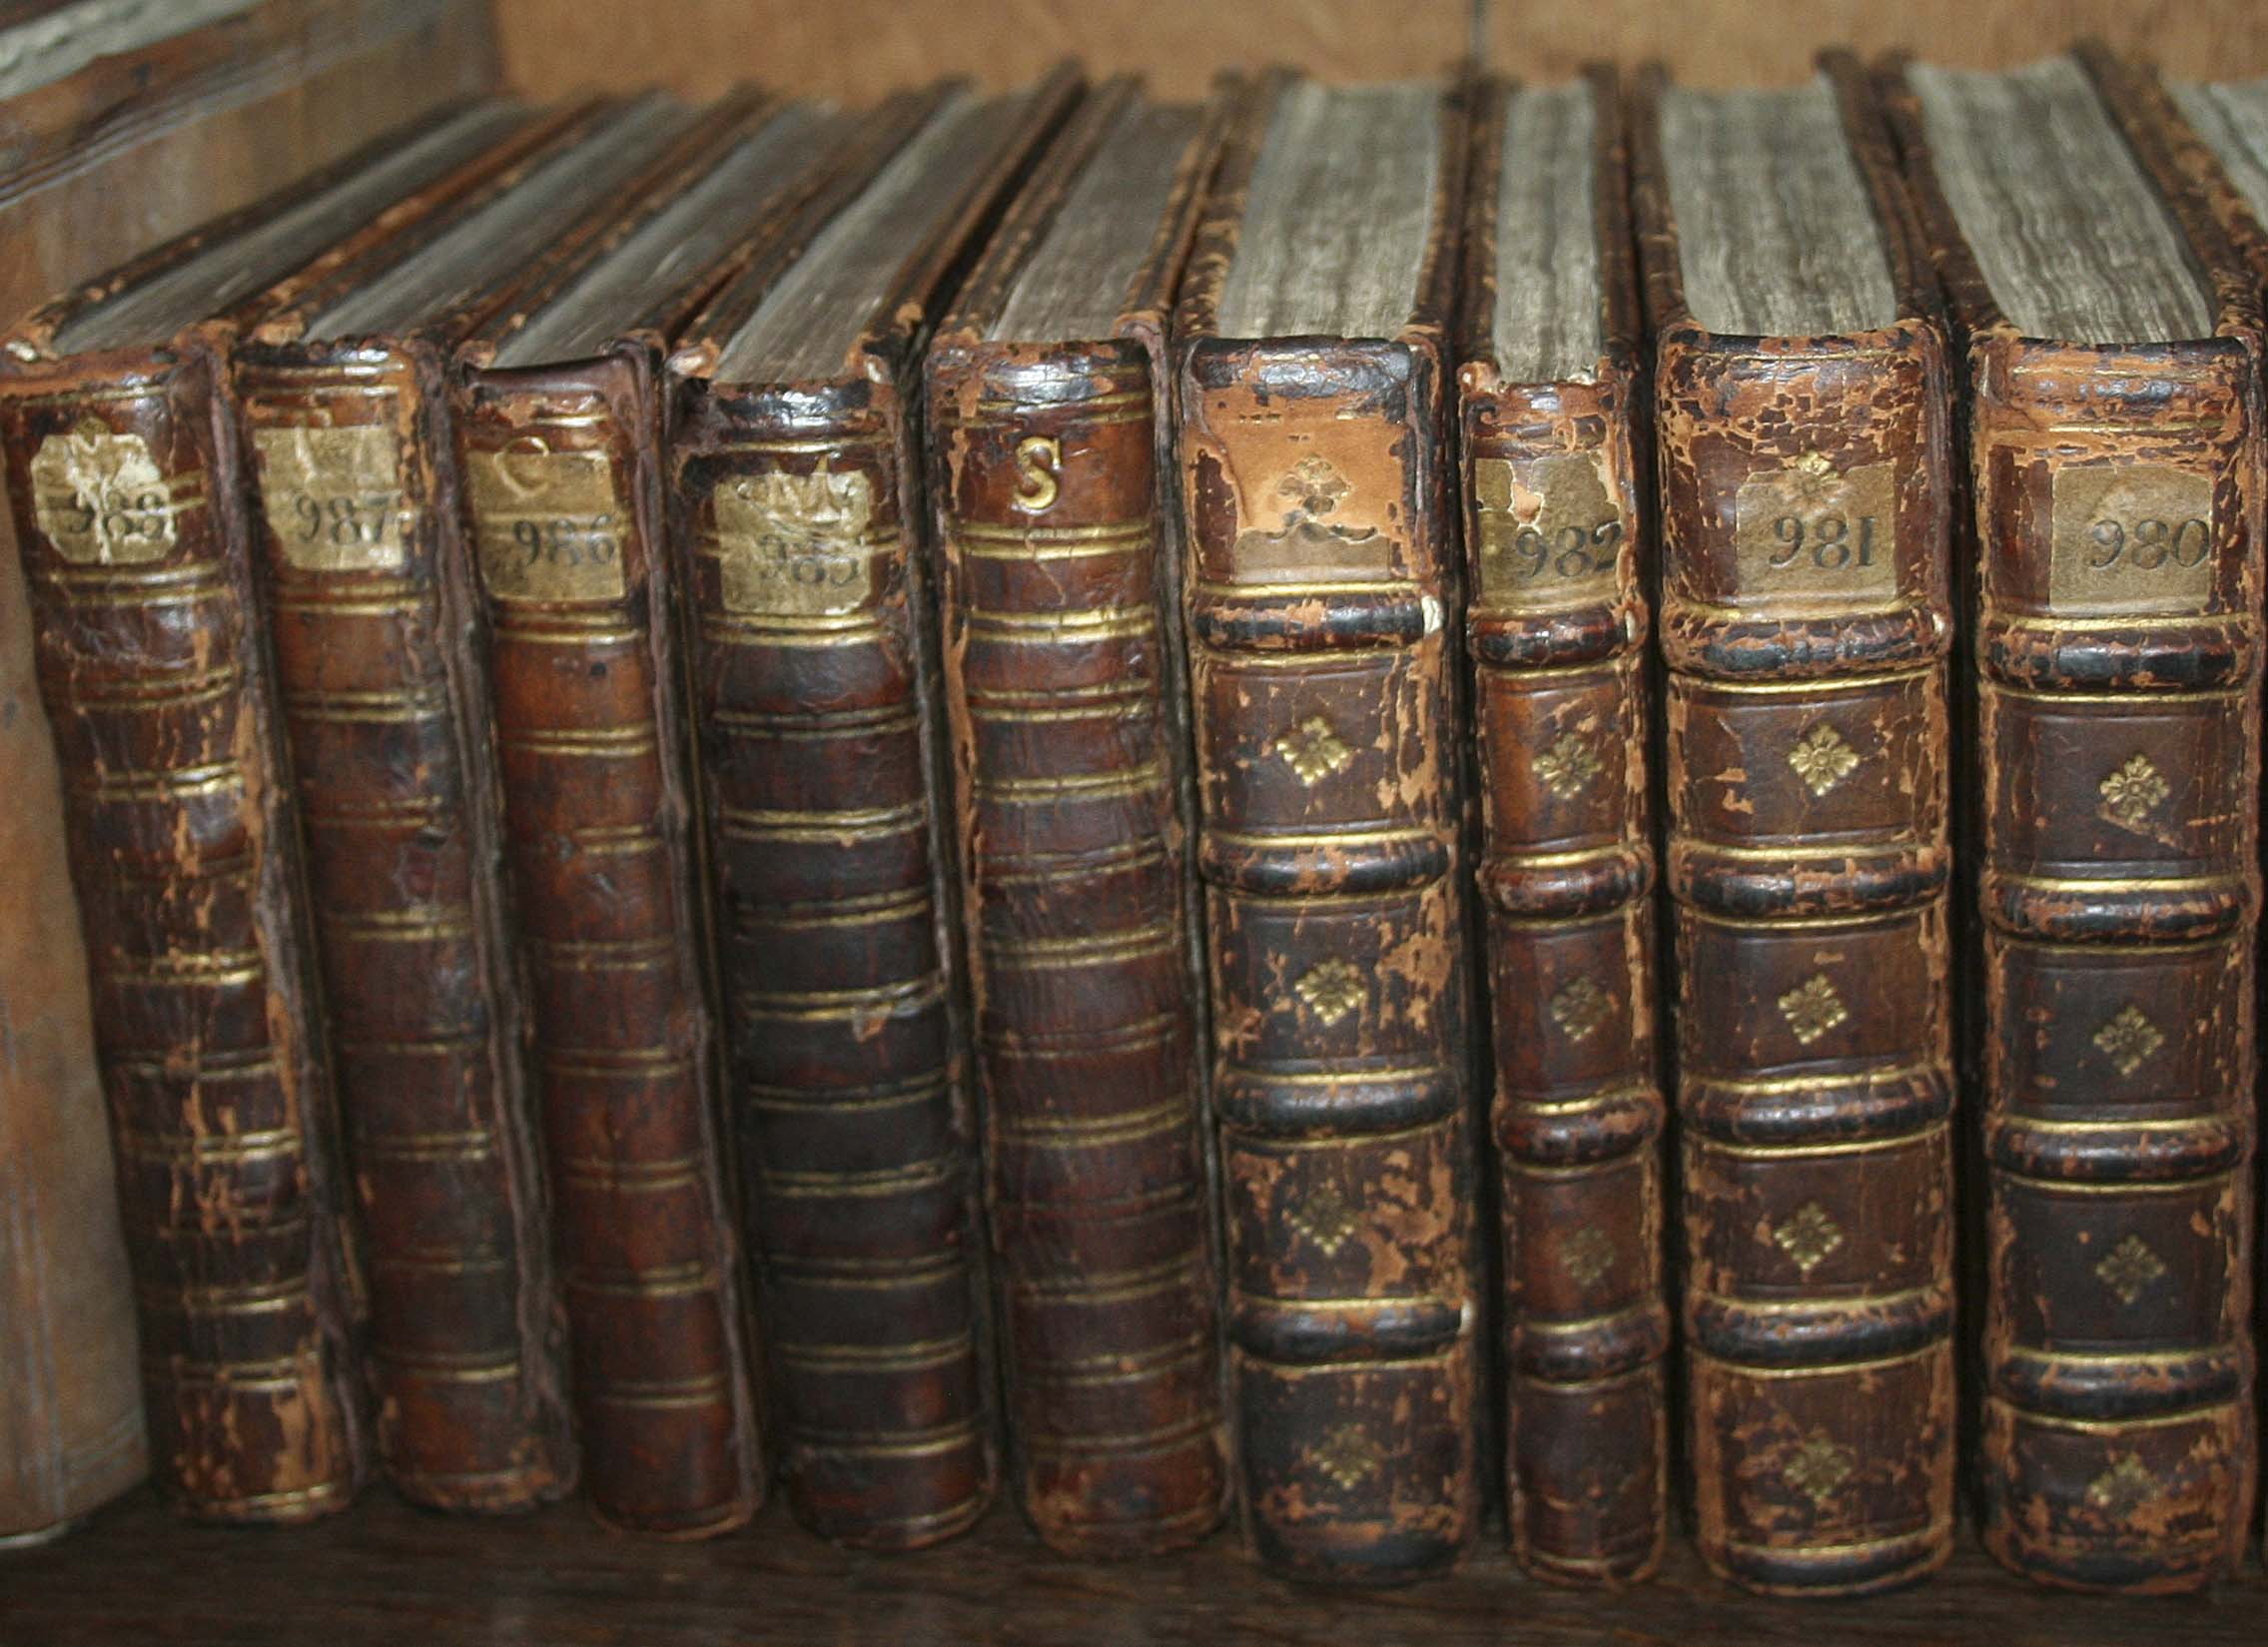 Tudor Partbooks in Christ Church College Library